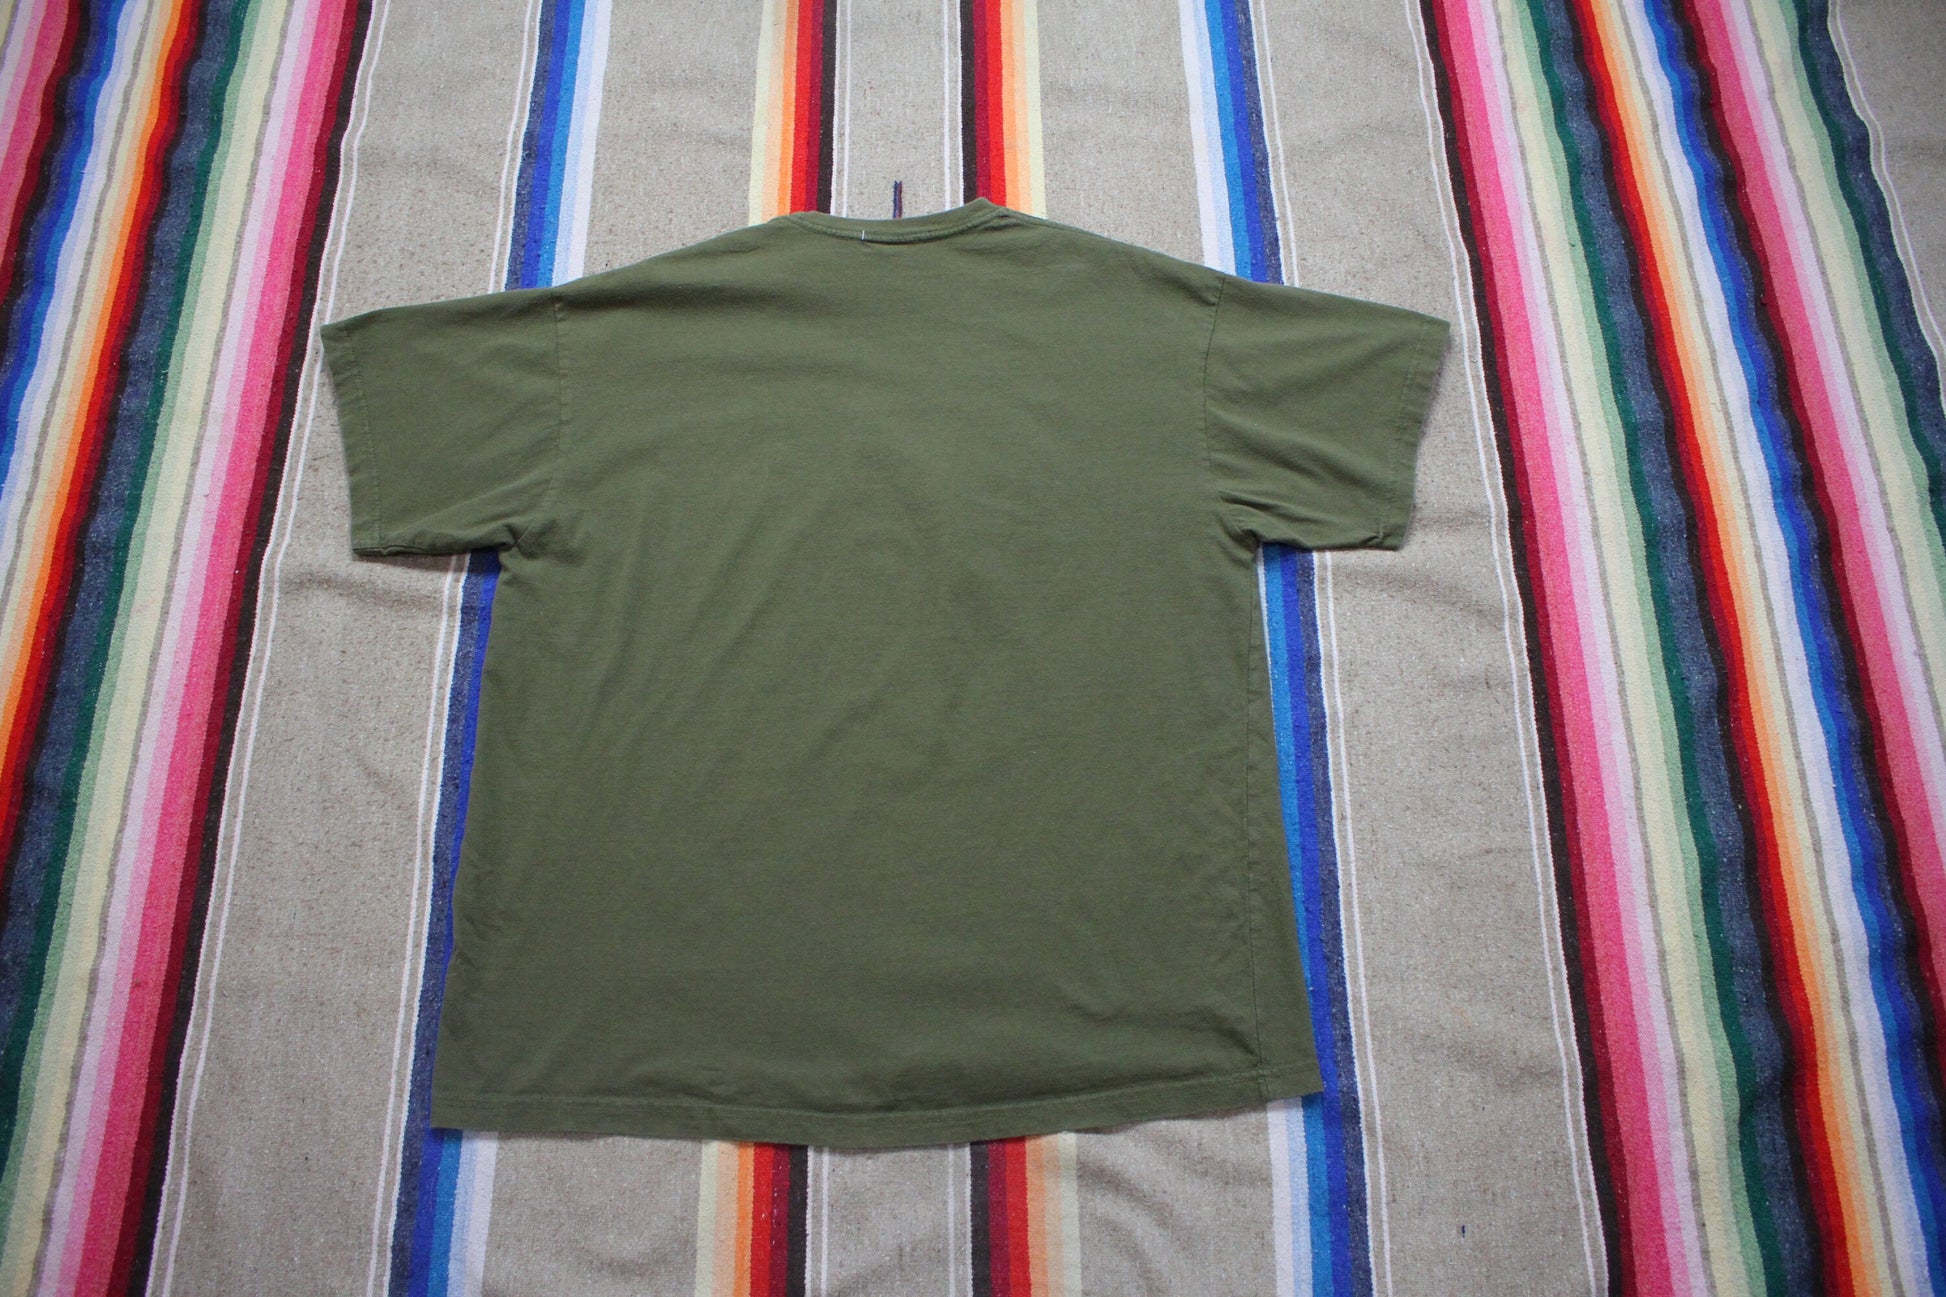 1990s World's Greatest Dad Camo T-Shirt Size L